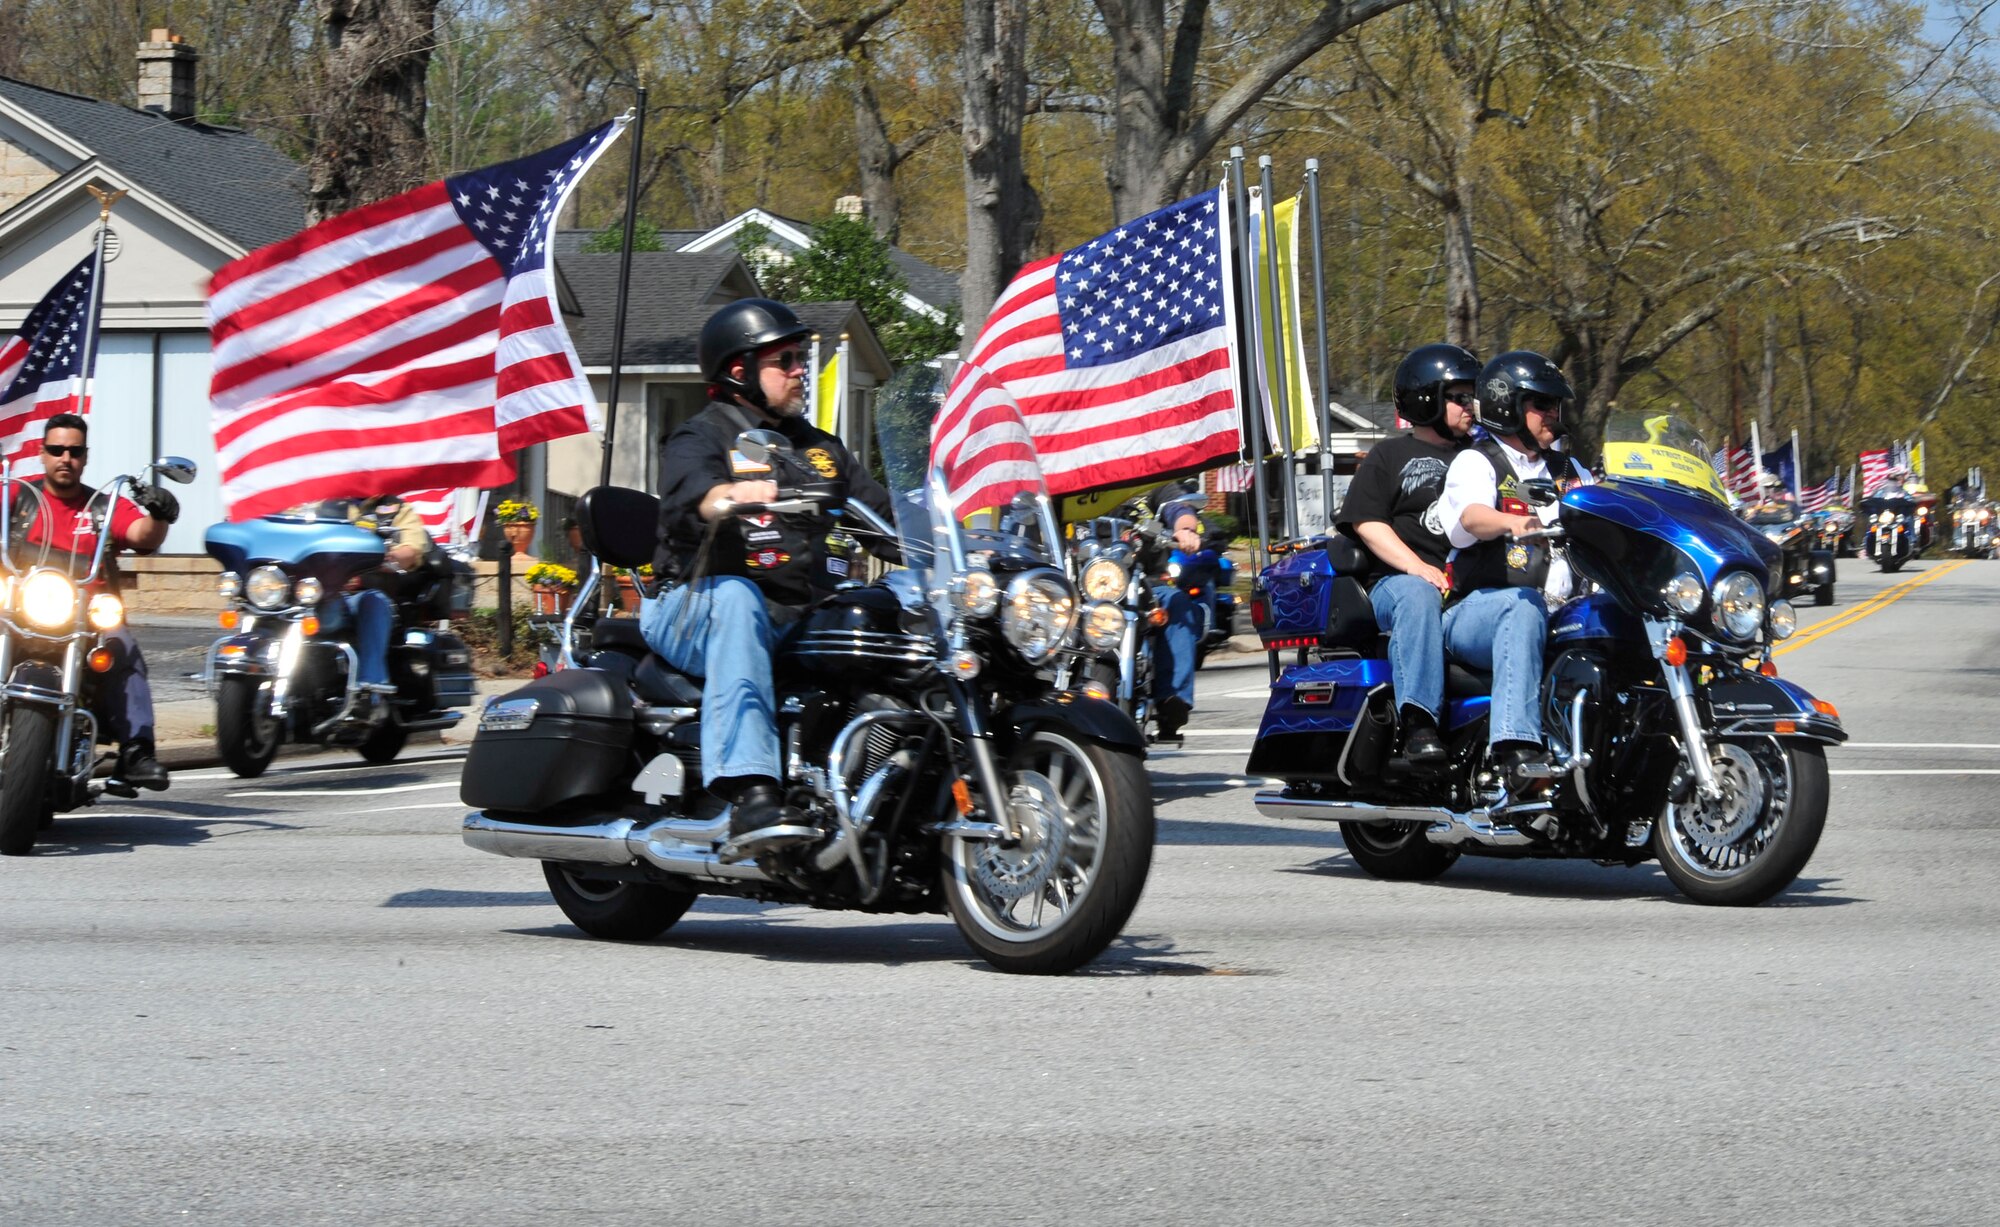 ANDERSON, S.C. - Motorcycle riders lead the funeral procession of Senior Airman Nicholas J. Alden, Anderson, S.C., March 19, 2011. Airman Alden, assigned to the 48th Security Forces Squadron, Royal Air Force Lakenheath, England, was killed during a shooting March 2 at Frankfurt International Airport. More than 1,000 locals gathered to honor Airman Alden. (U.S. Air Force photo/Tech. Sgt. Vincent A. Mouzon (Released))